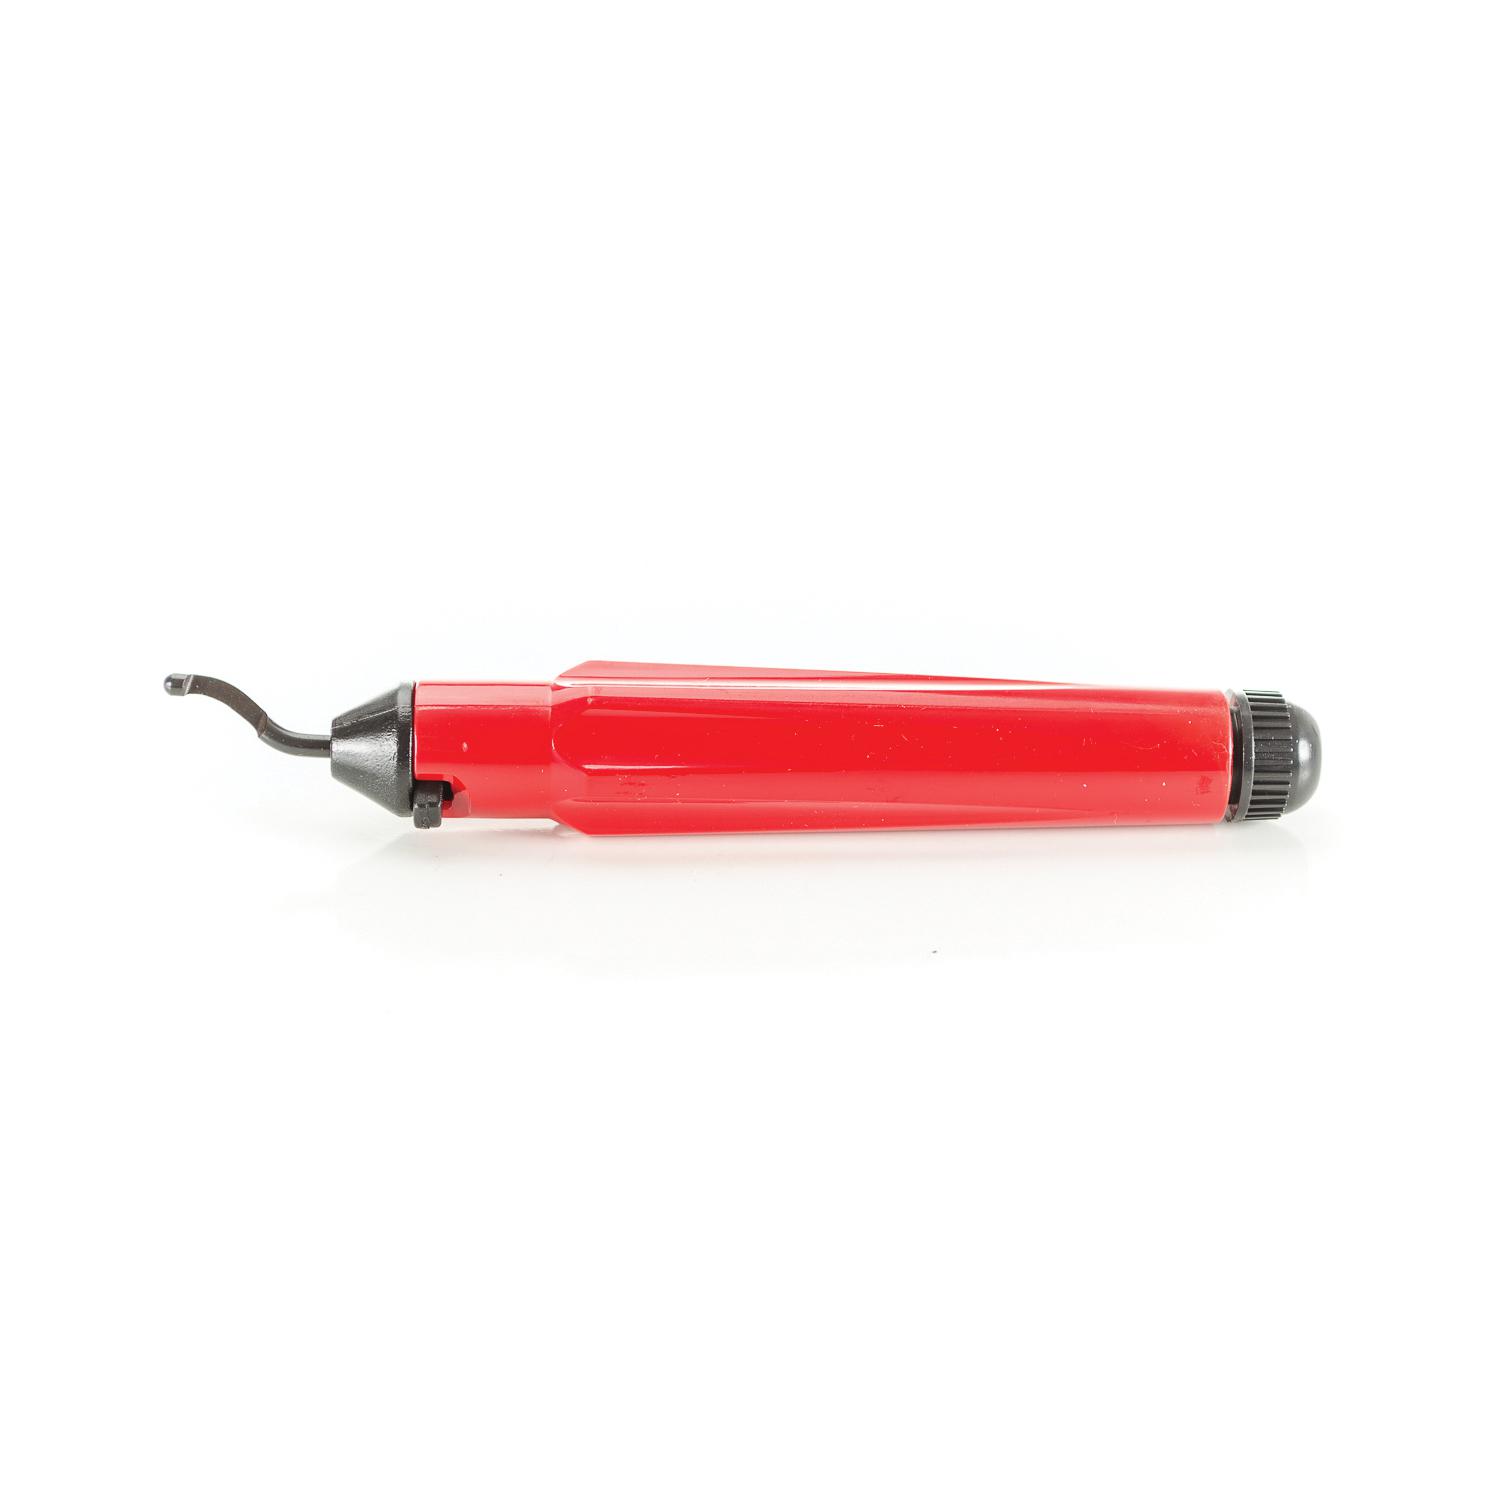 PASCO 5104 Pipe Deburring Tool With Plastic Handle